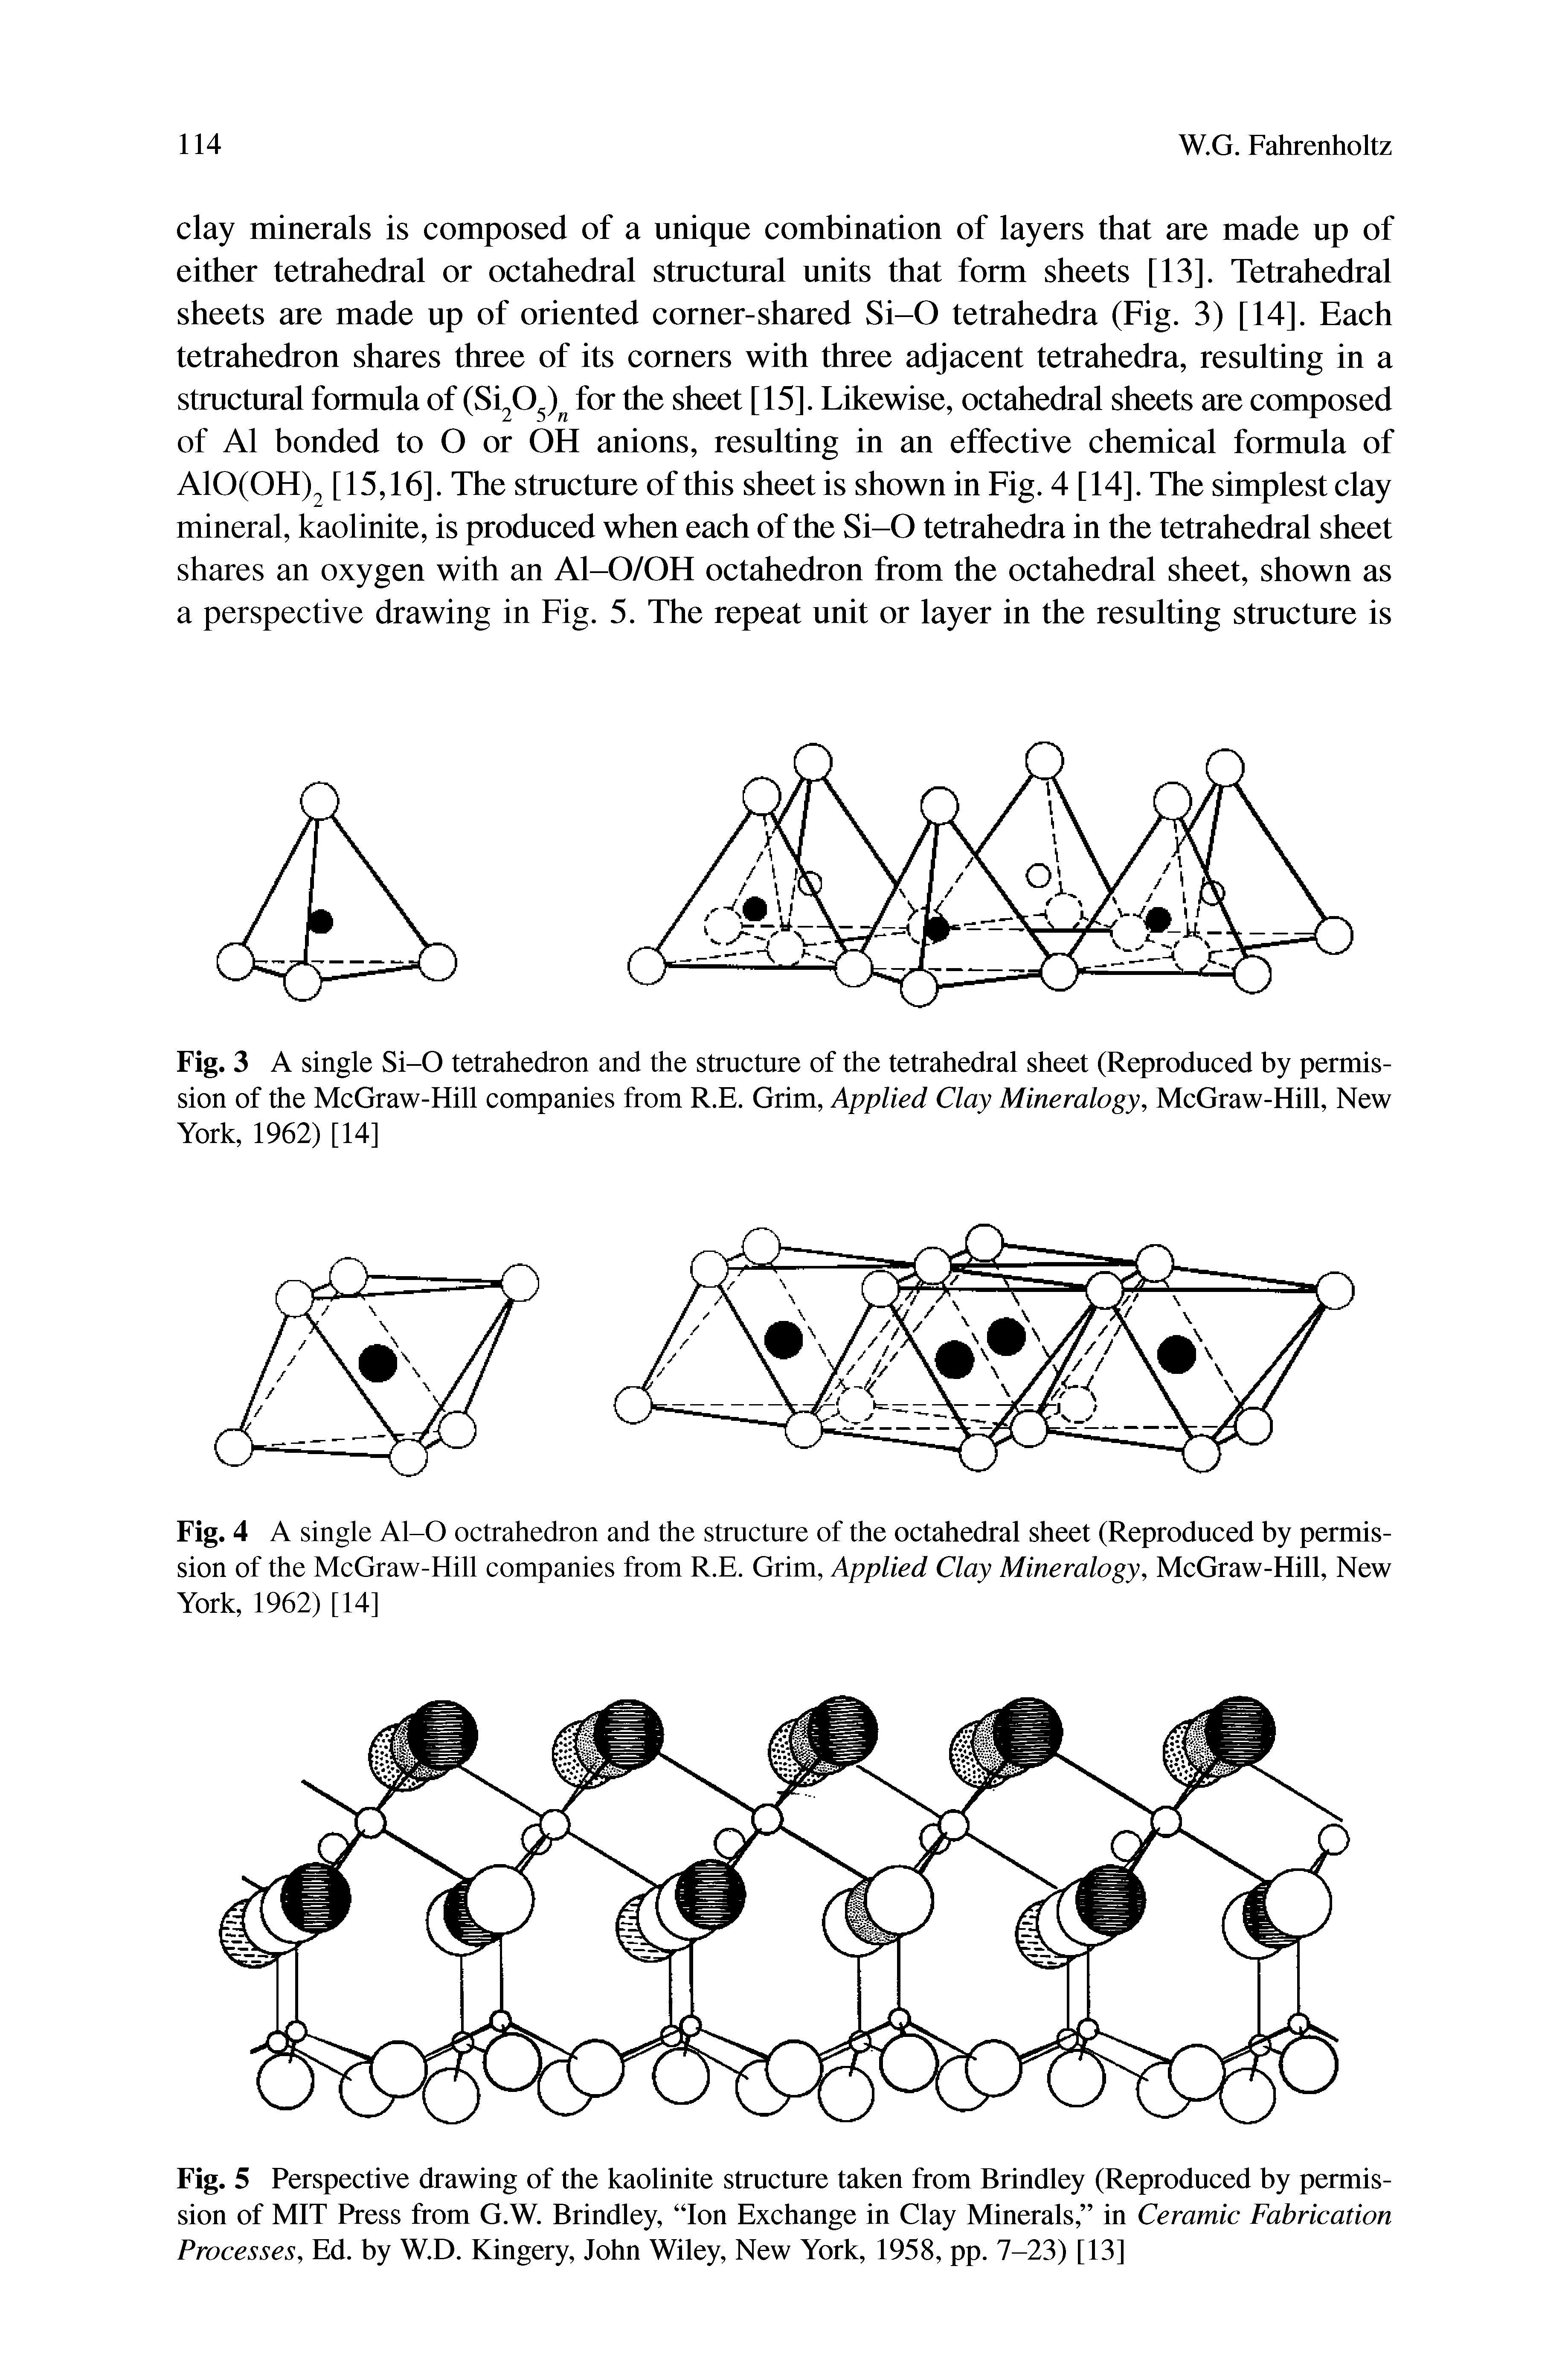 Fig. 5 Perspective drawing of the kaolinite structure taken from Brindley (Reproduced by permission of MIT Press from G.W. Brindley, Ion Exchange in Clay Minerals, in Ceramic Fabrication Processes, Ed. by W.D. Kingery, John Wiley, New York, 1958, pp. 7-23) [13]...